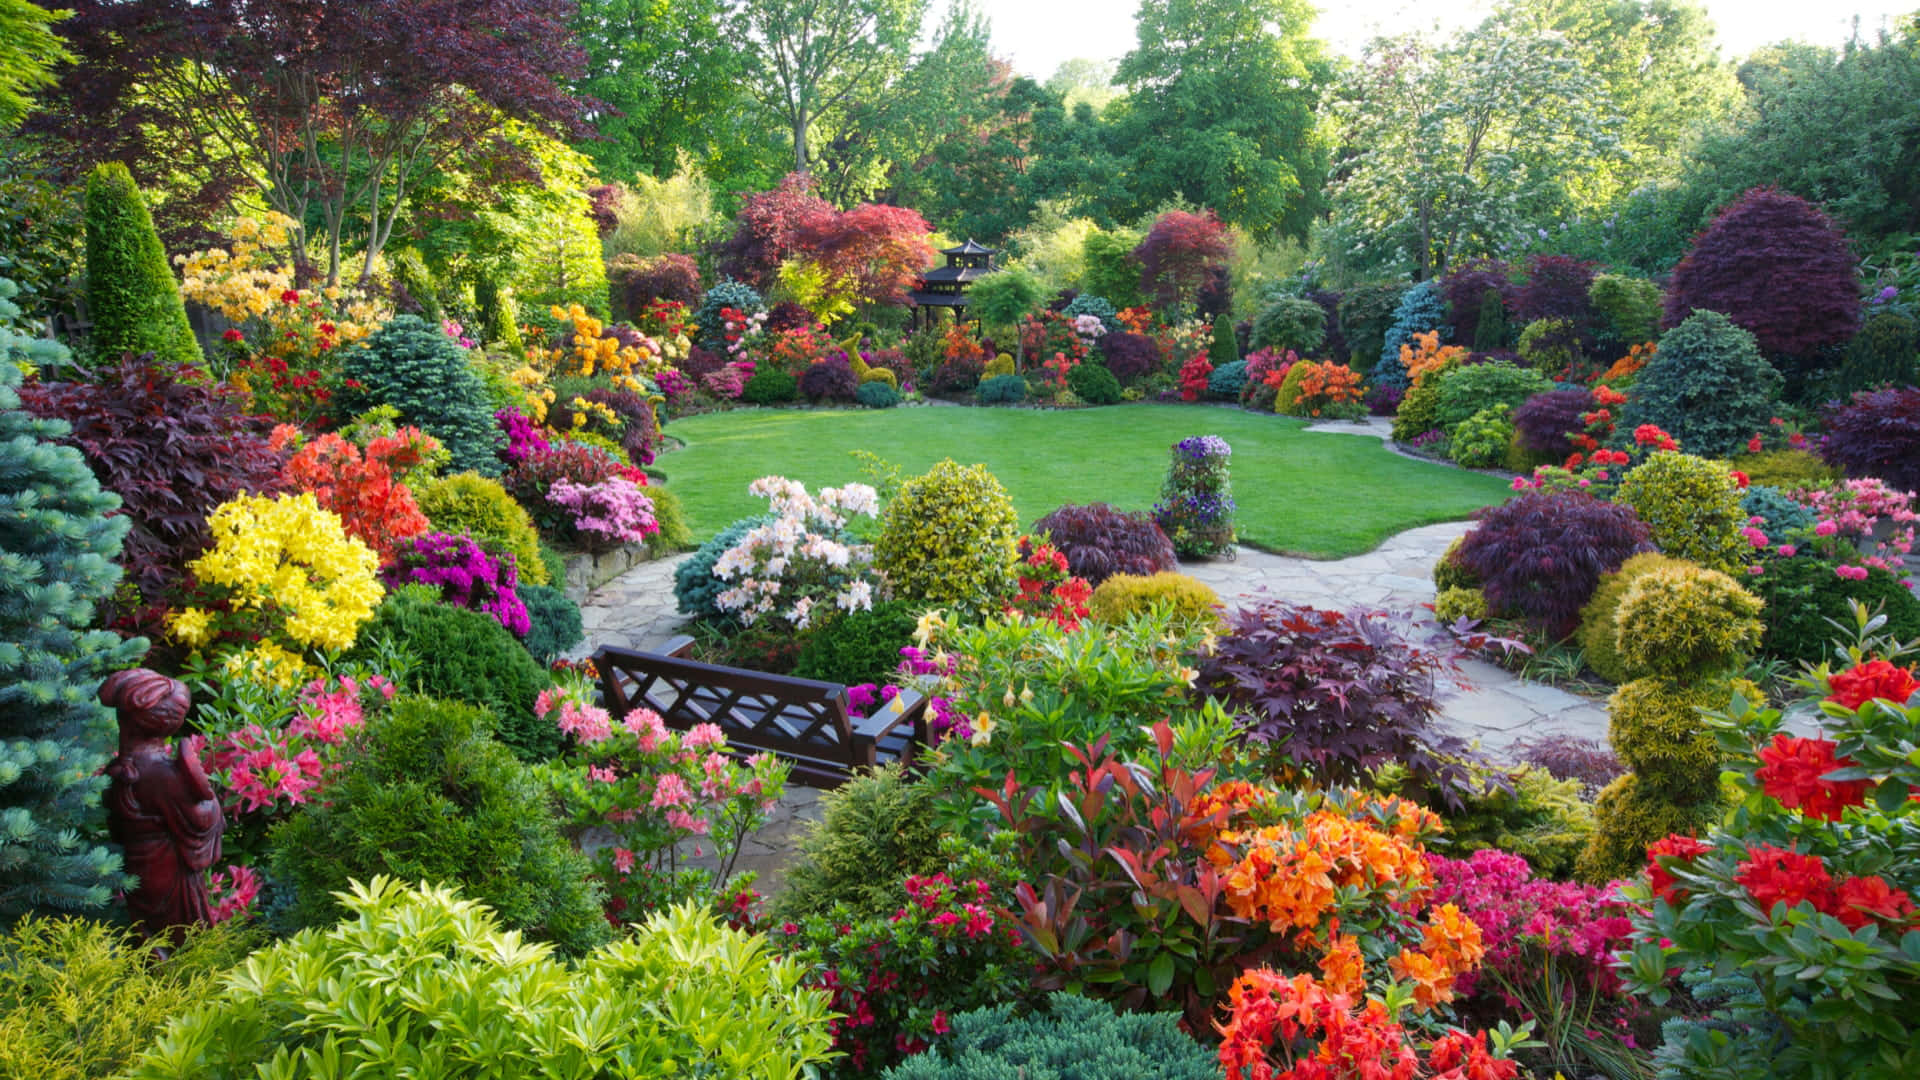 a colorful garden with many different flowers